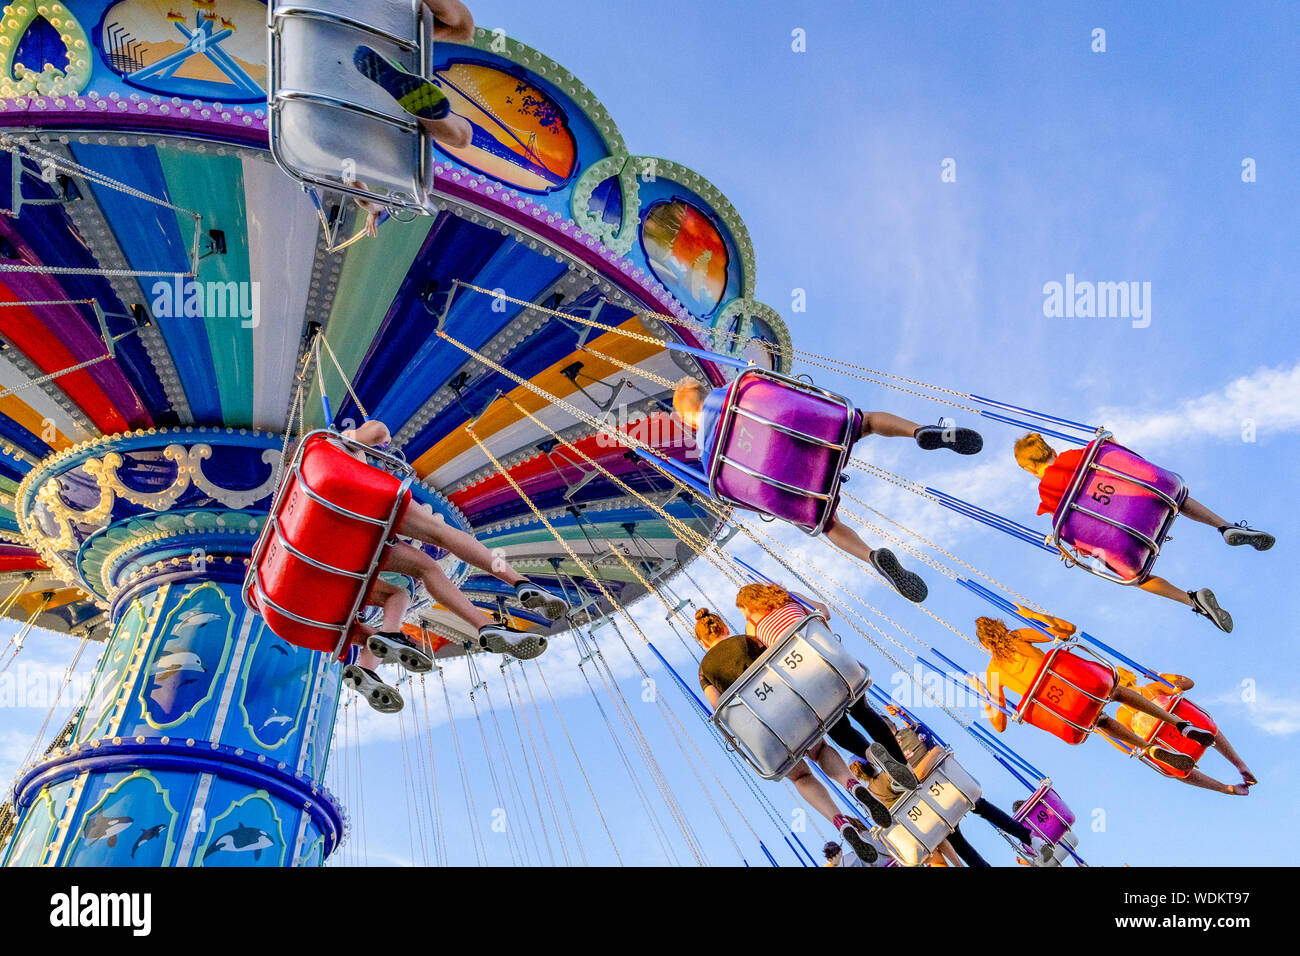 Sea to Sky Swinger, Playland, Hastings Park, Vancouver, British Columbia, Canada Stock Photo